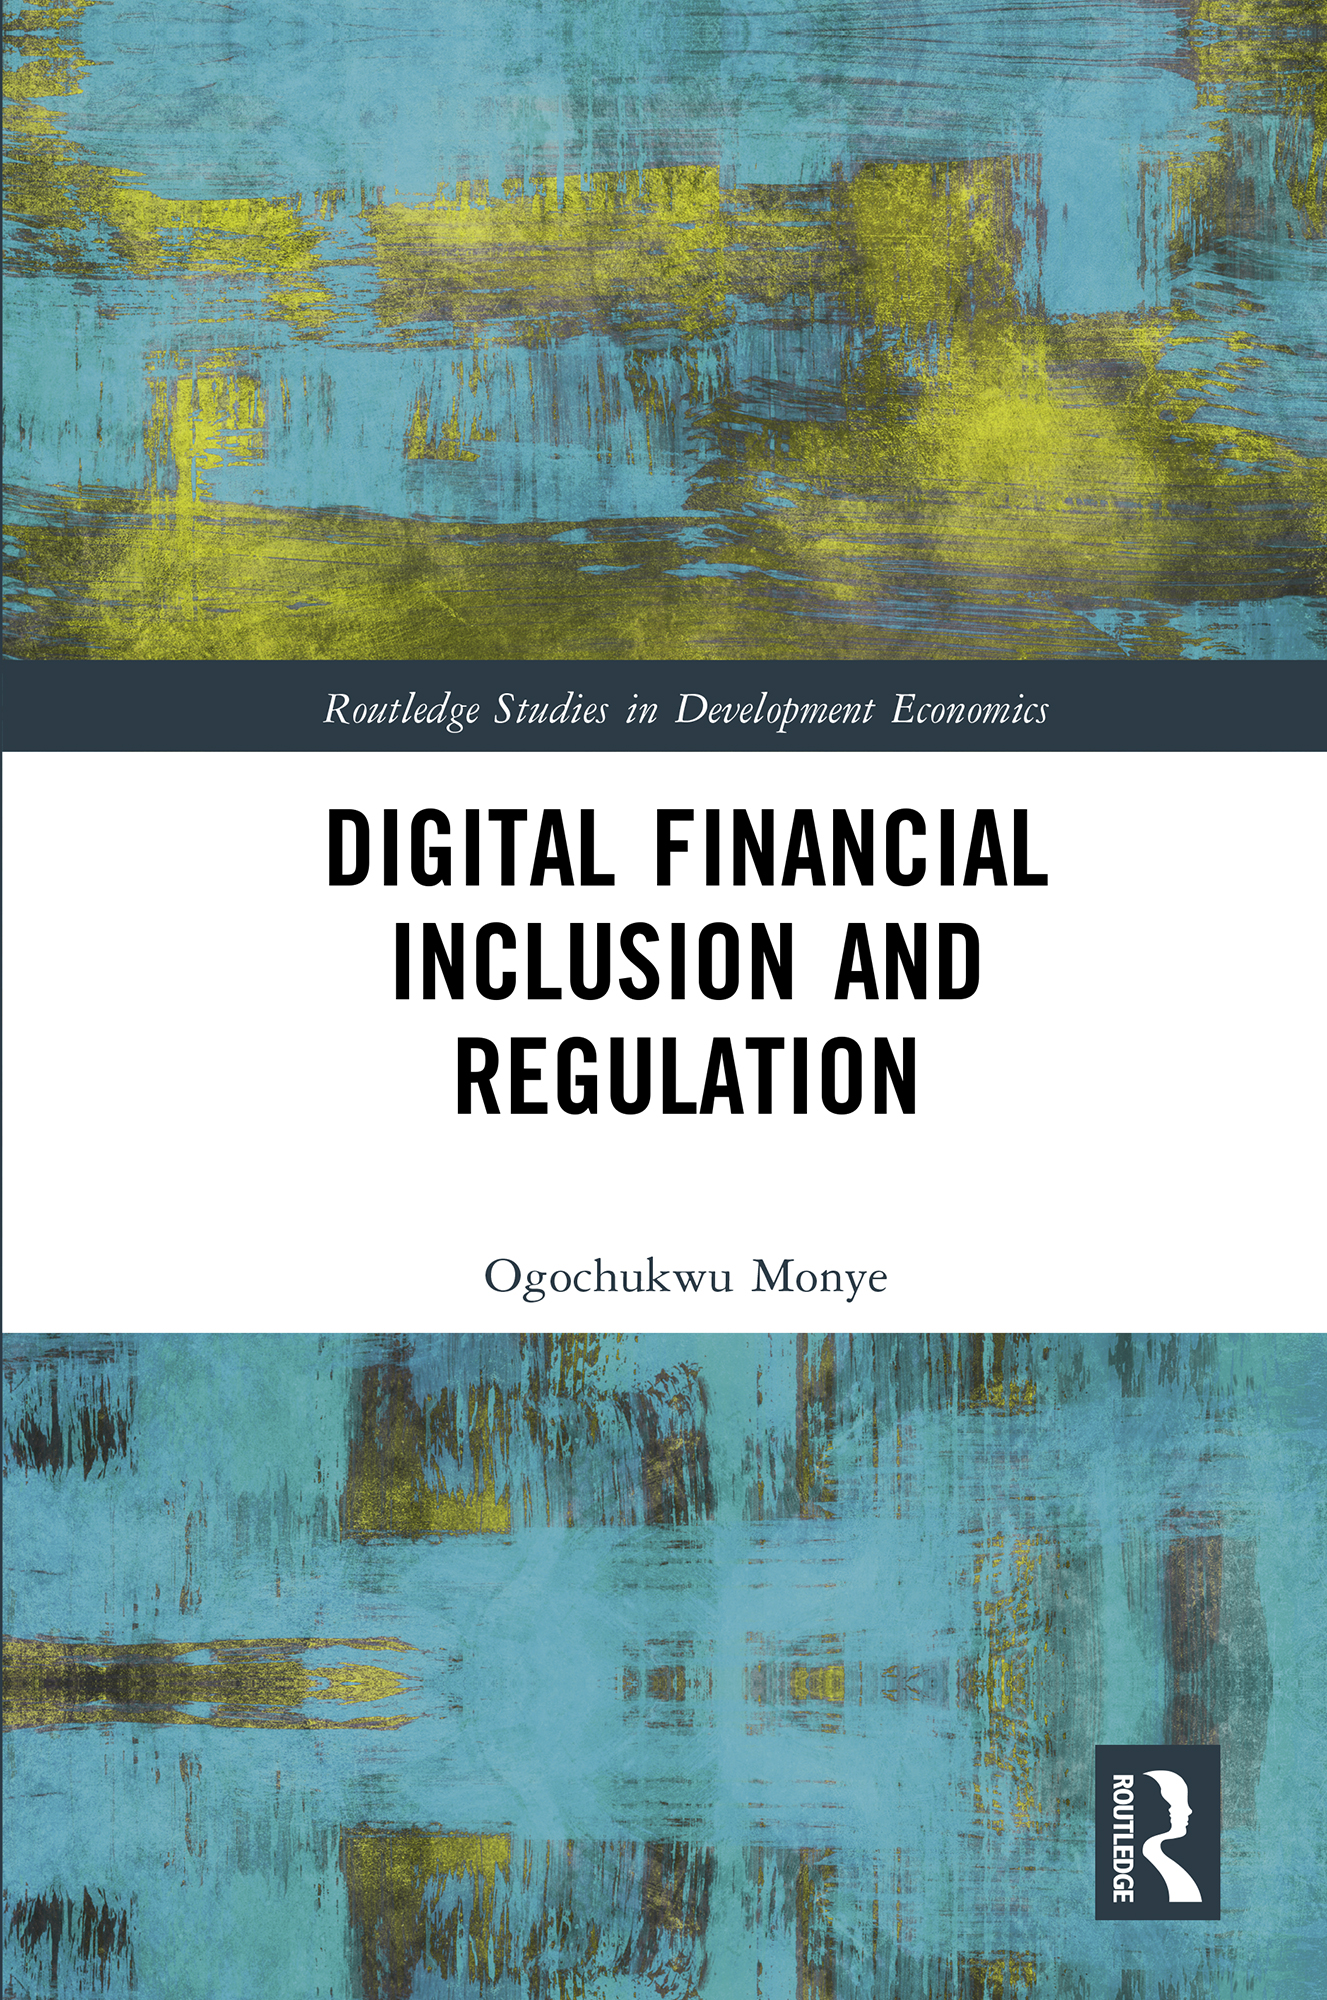 Digital Financial Inclusion and Regulation